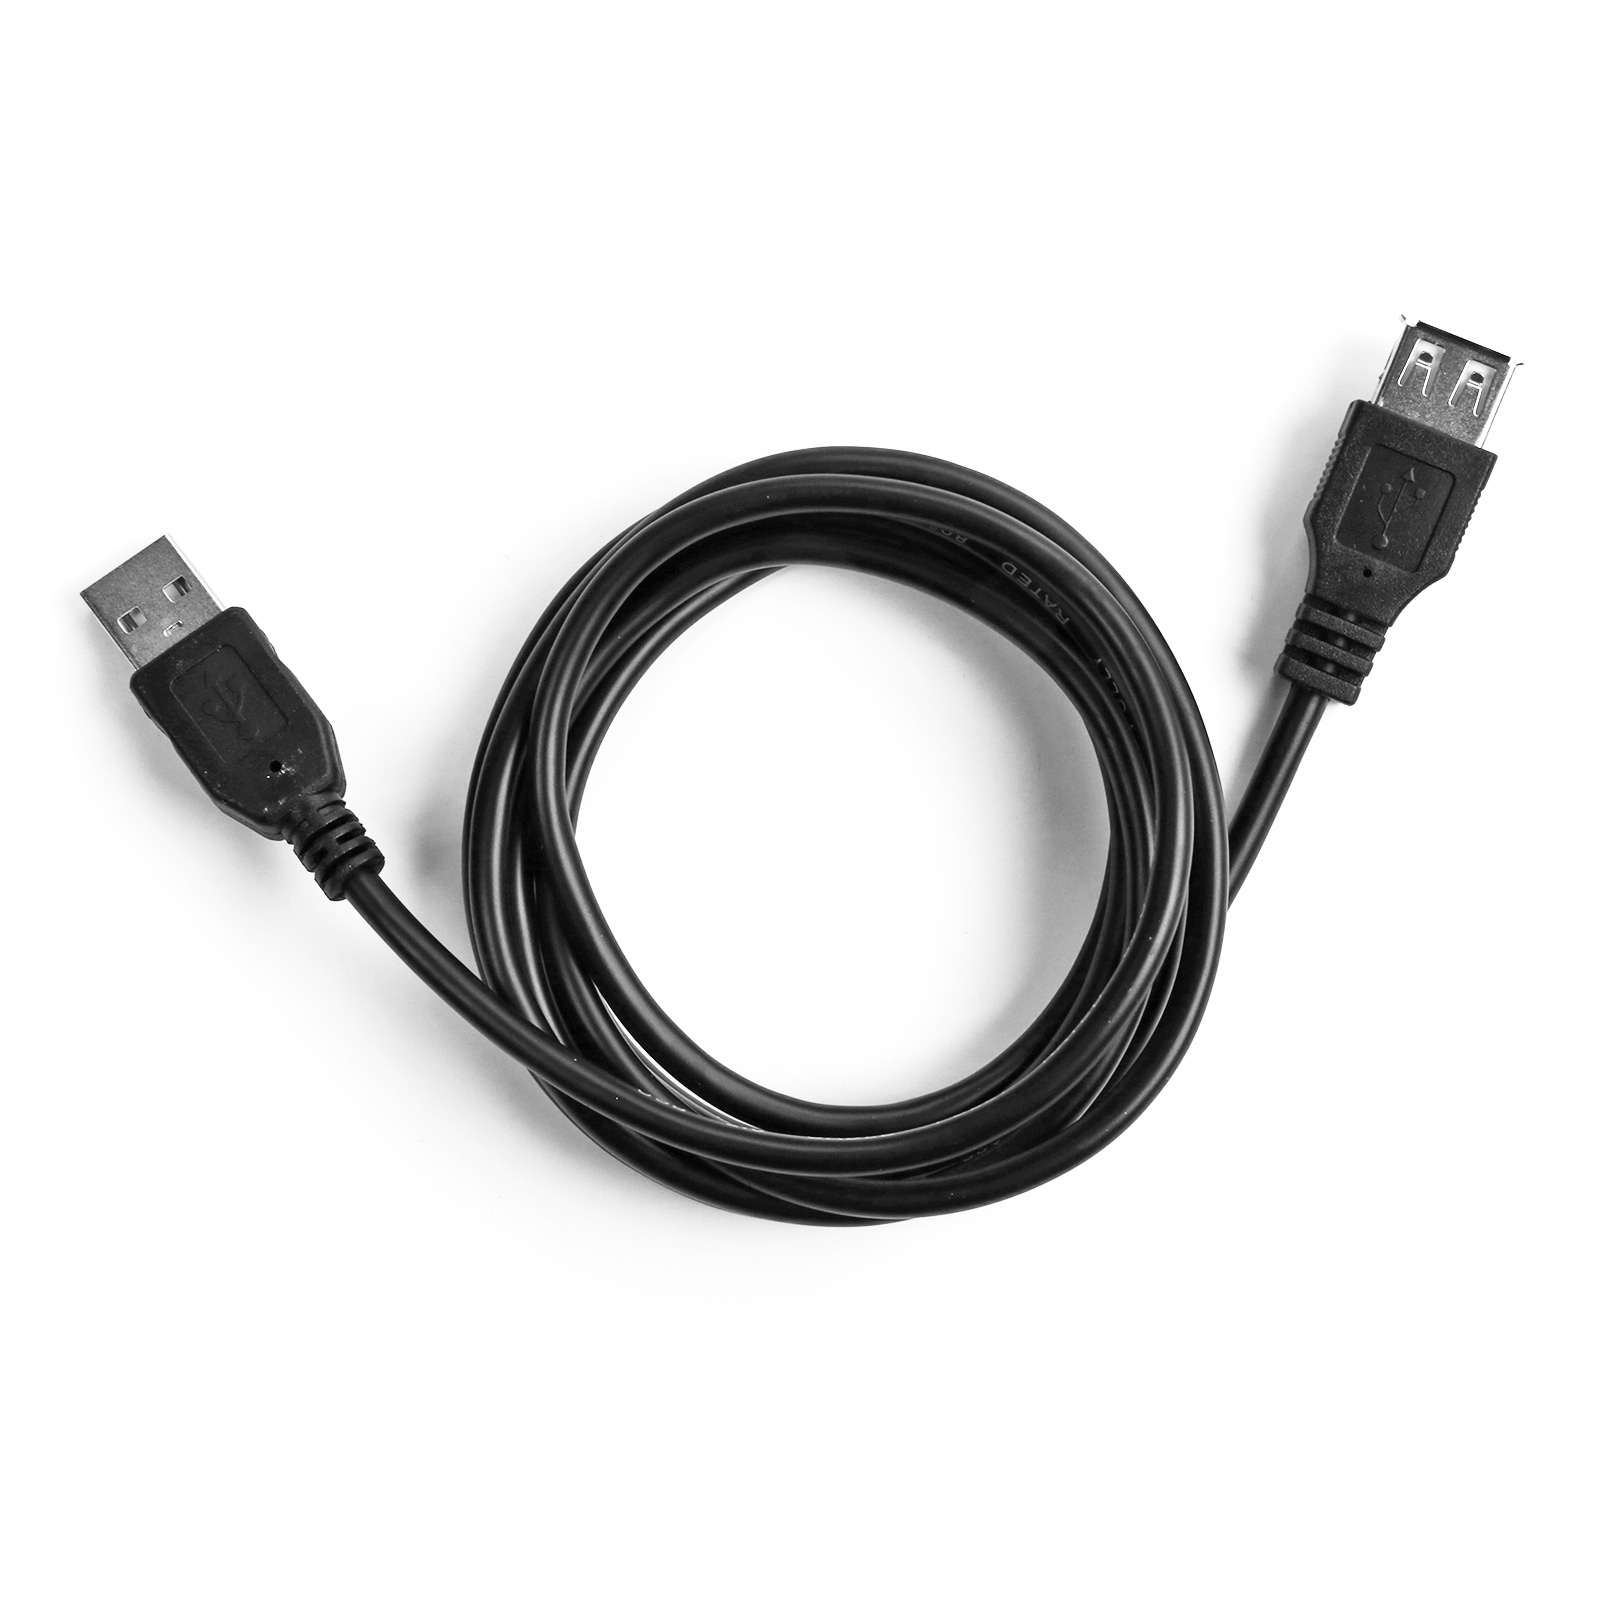 EKON USB cable 2.0 type A male to type B male length 1,8 m. nickel plated connector                           OD=4.0mm                          